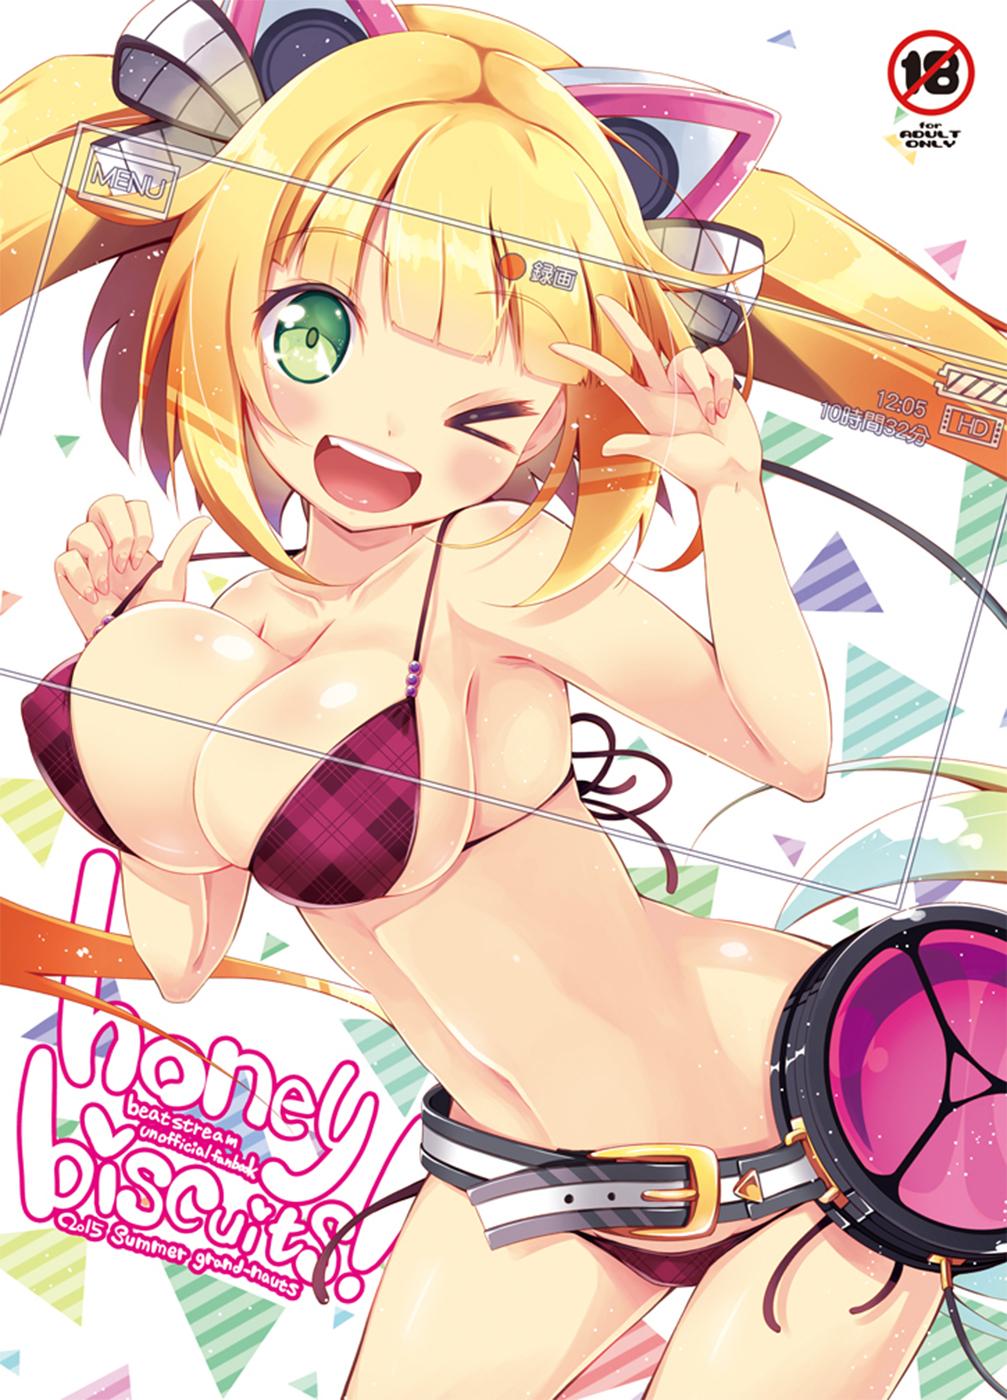 Perfect Girl Porn Honey Biscuits! - Beatstream Pau - Page 2